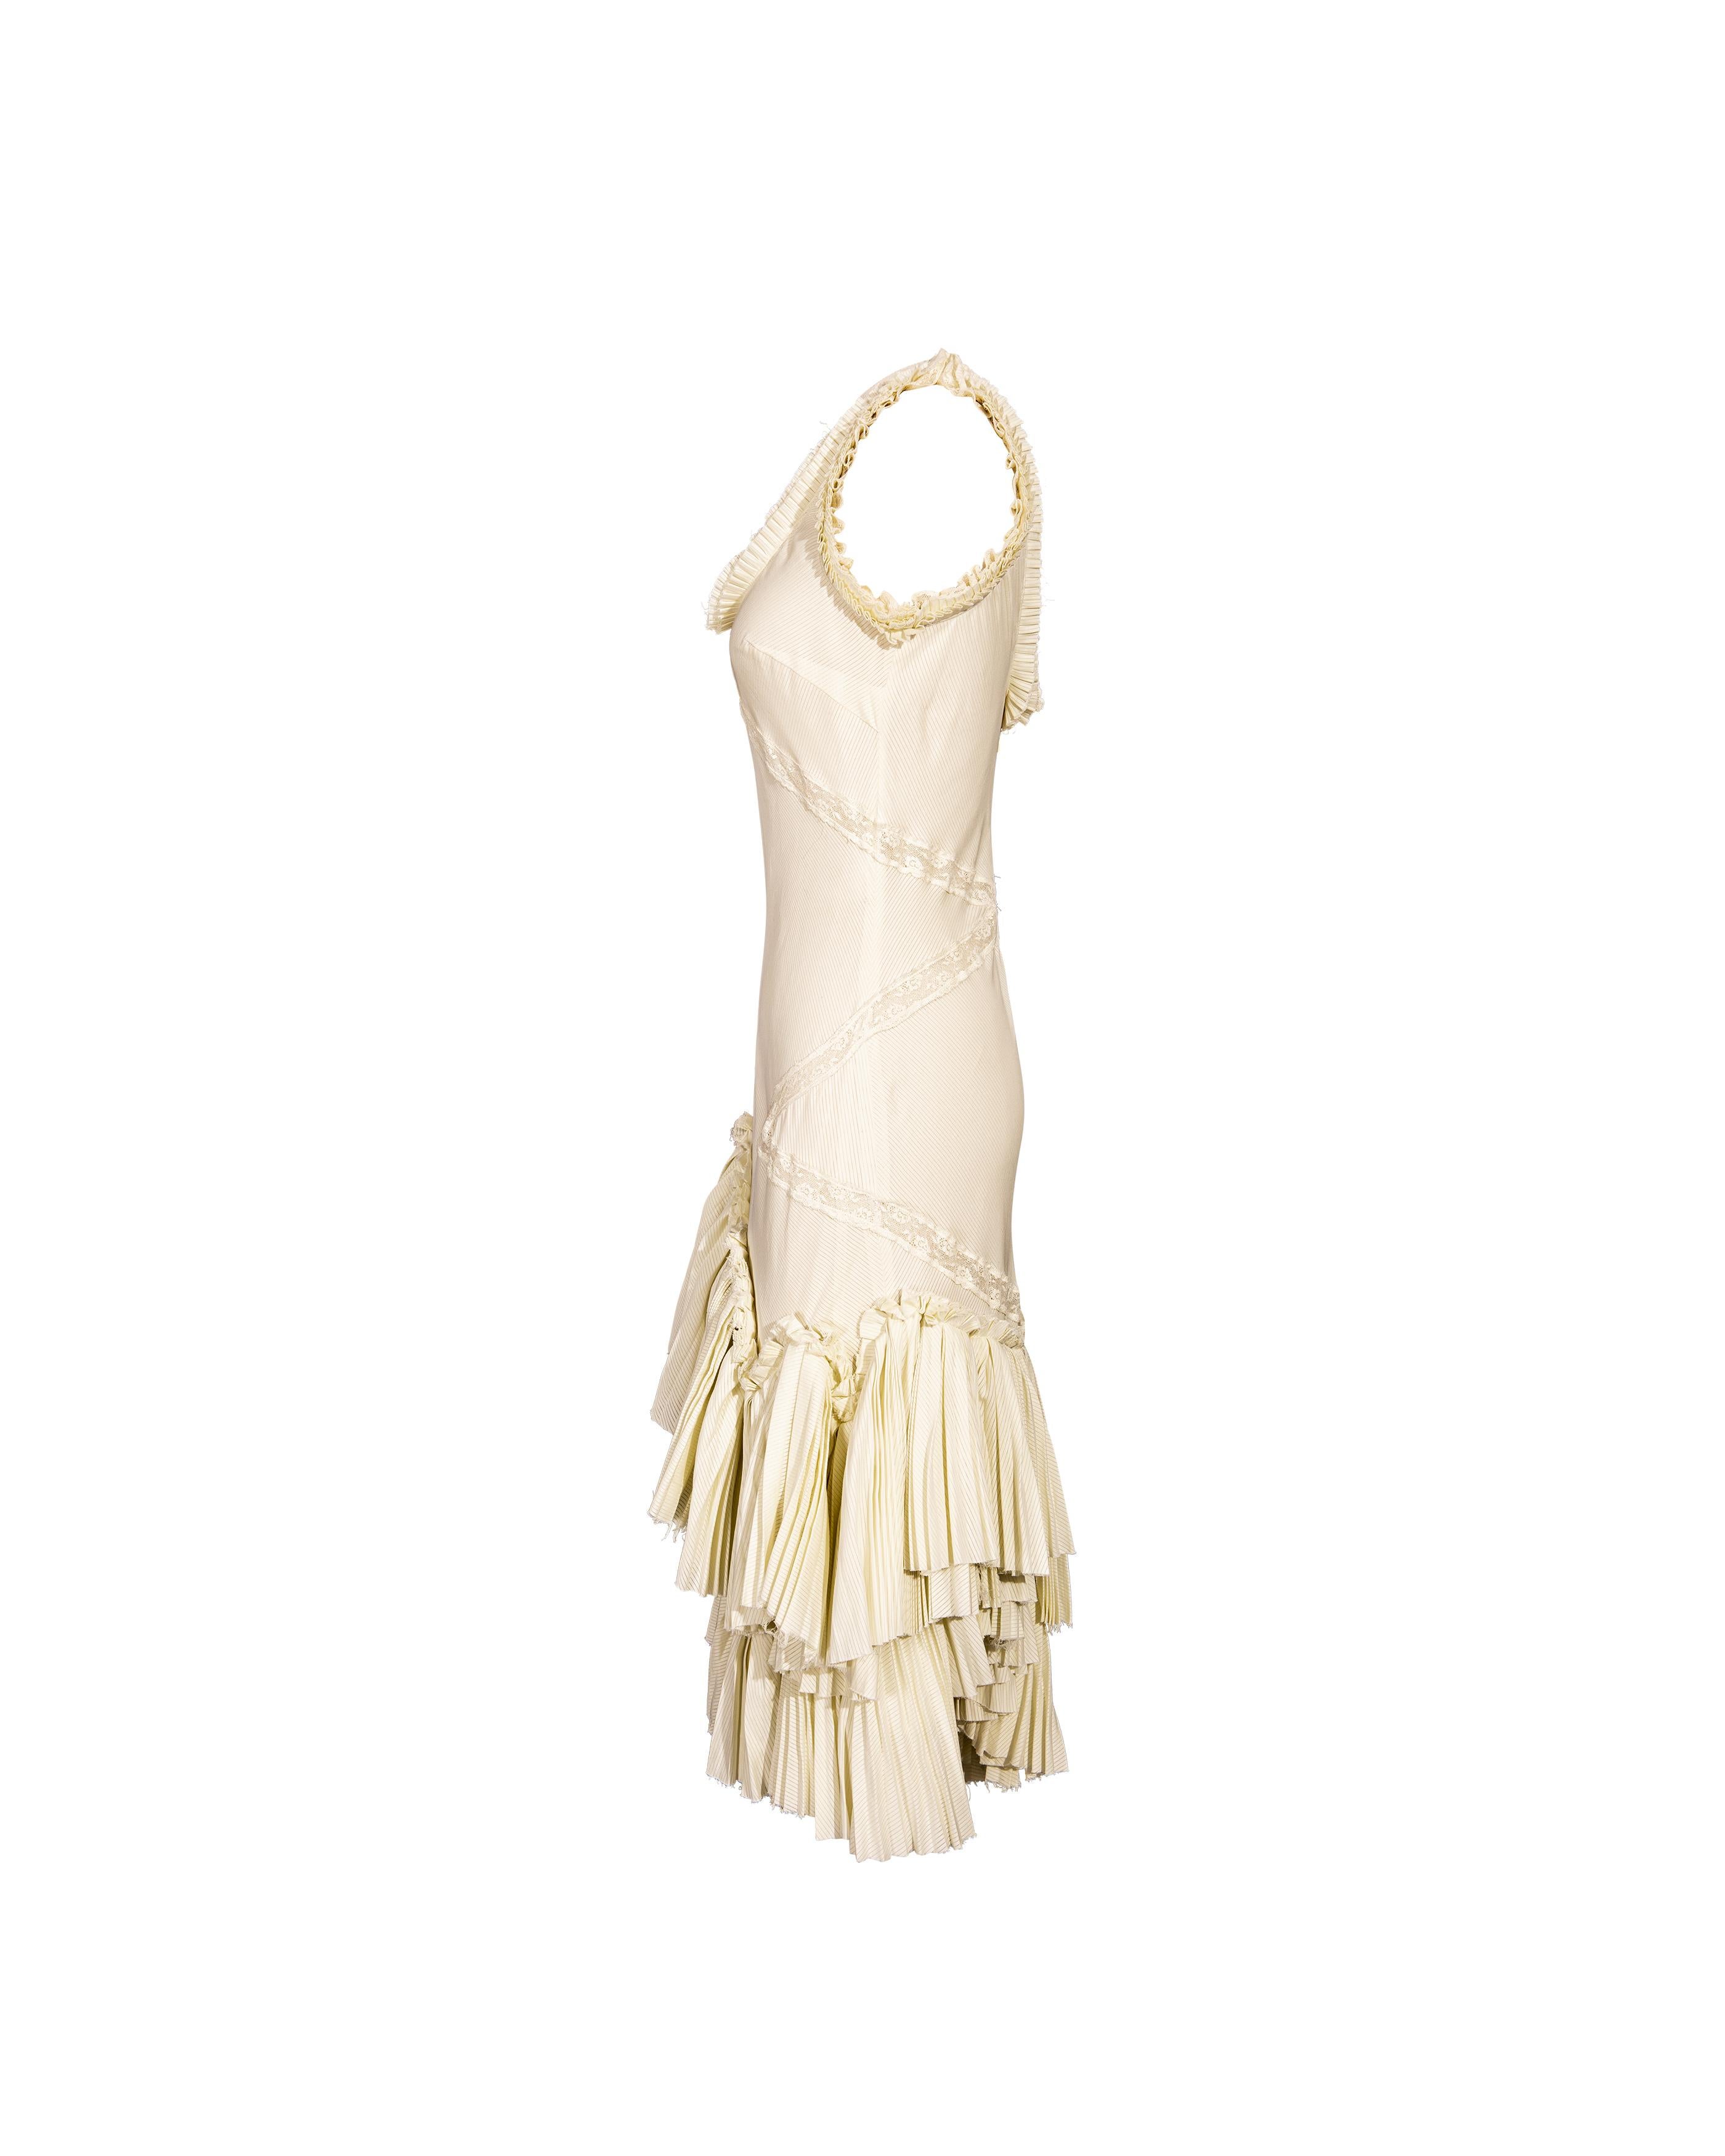 Women's or Men's S/S 2005 Alexander McQueen (Lifetime) Pale Yellow Pleated and Lace Cotton Dress